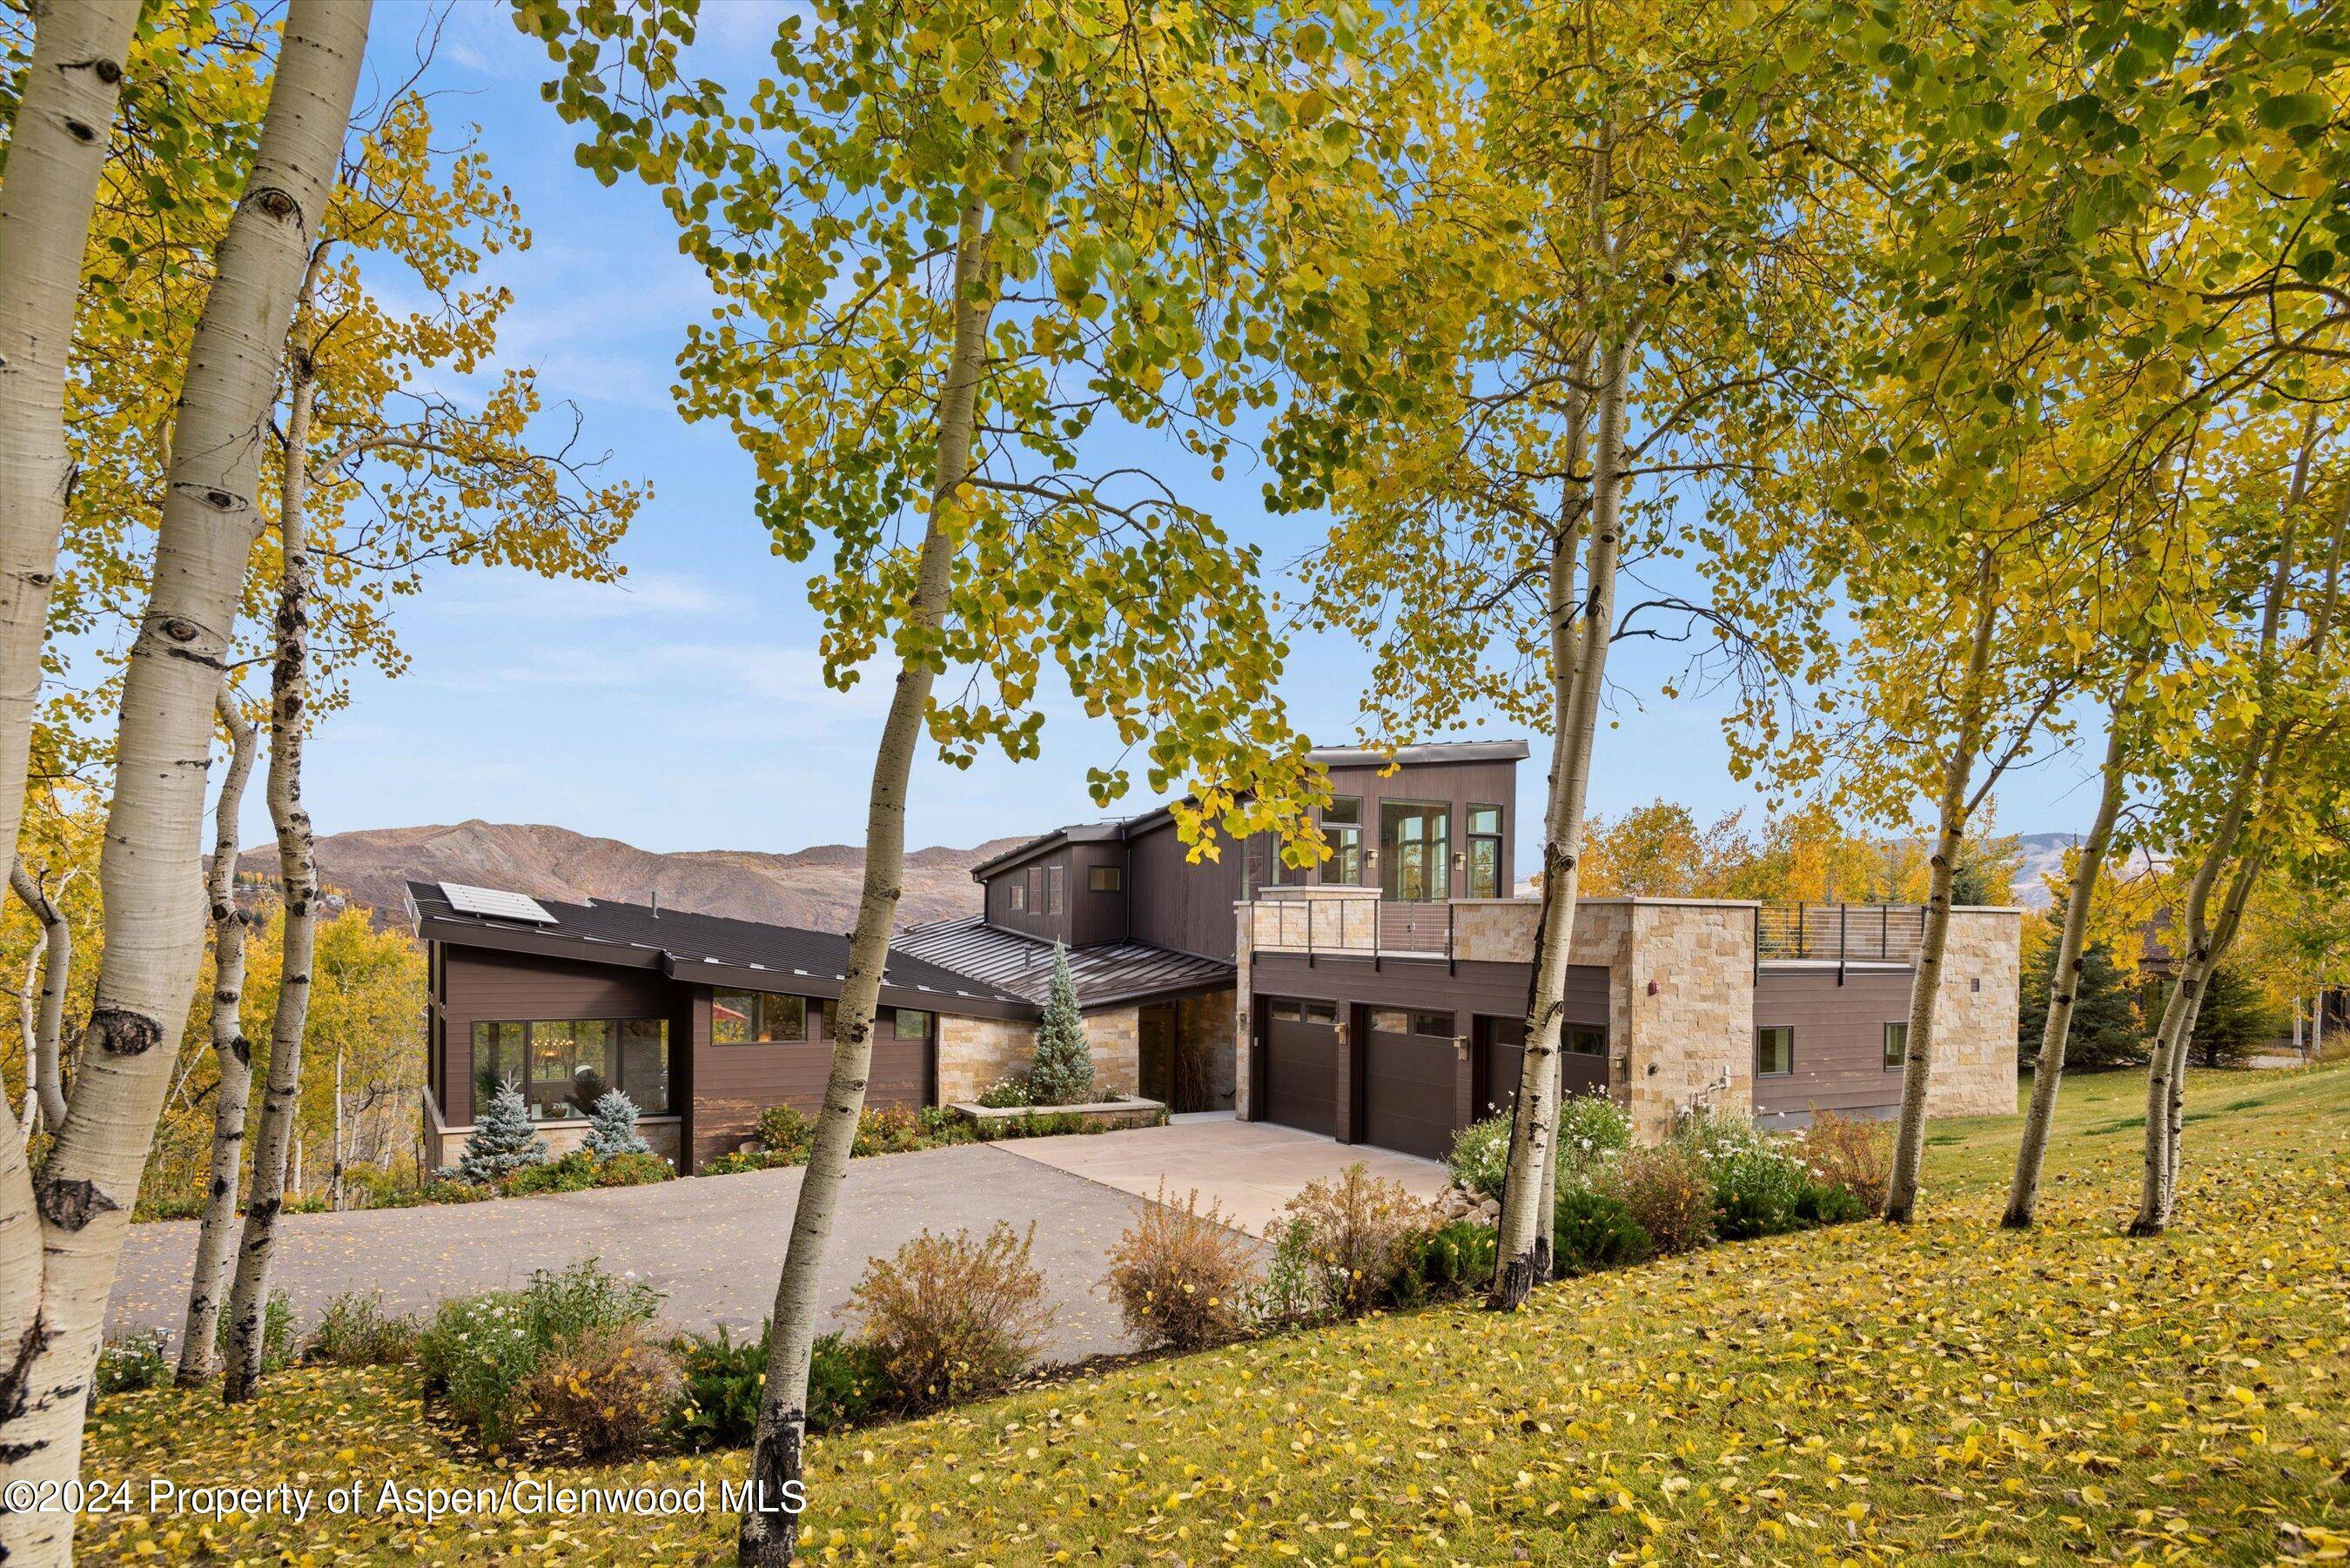 Stunning Mountain Contemporary home located in the exclusive Fox Run Subdivision.